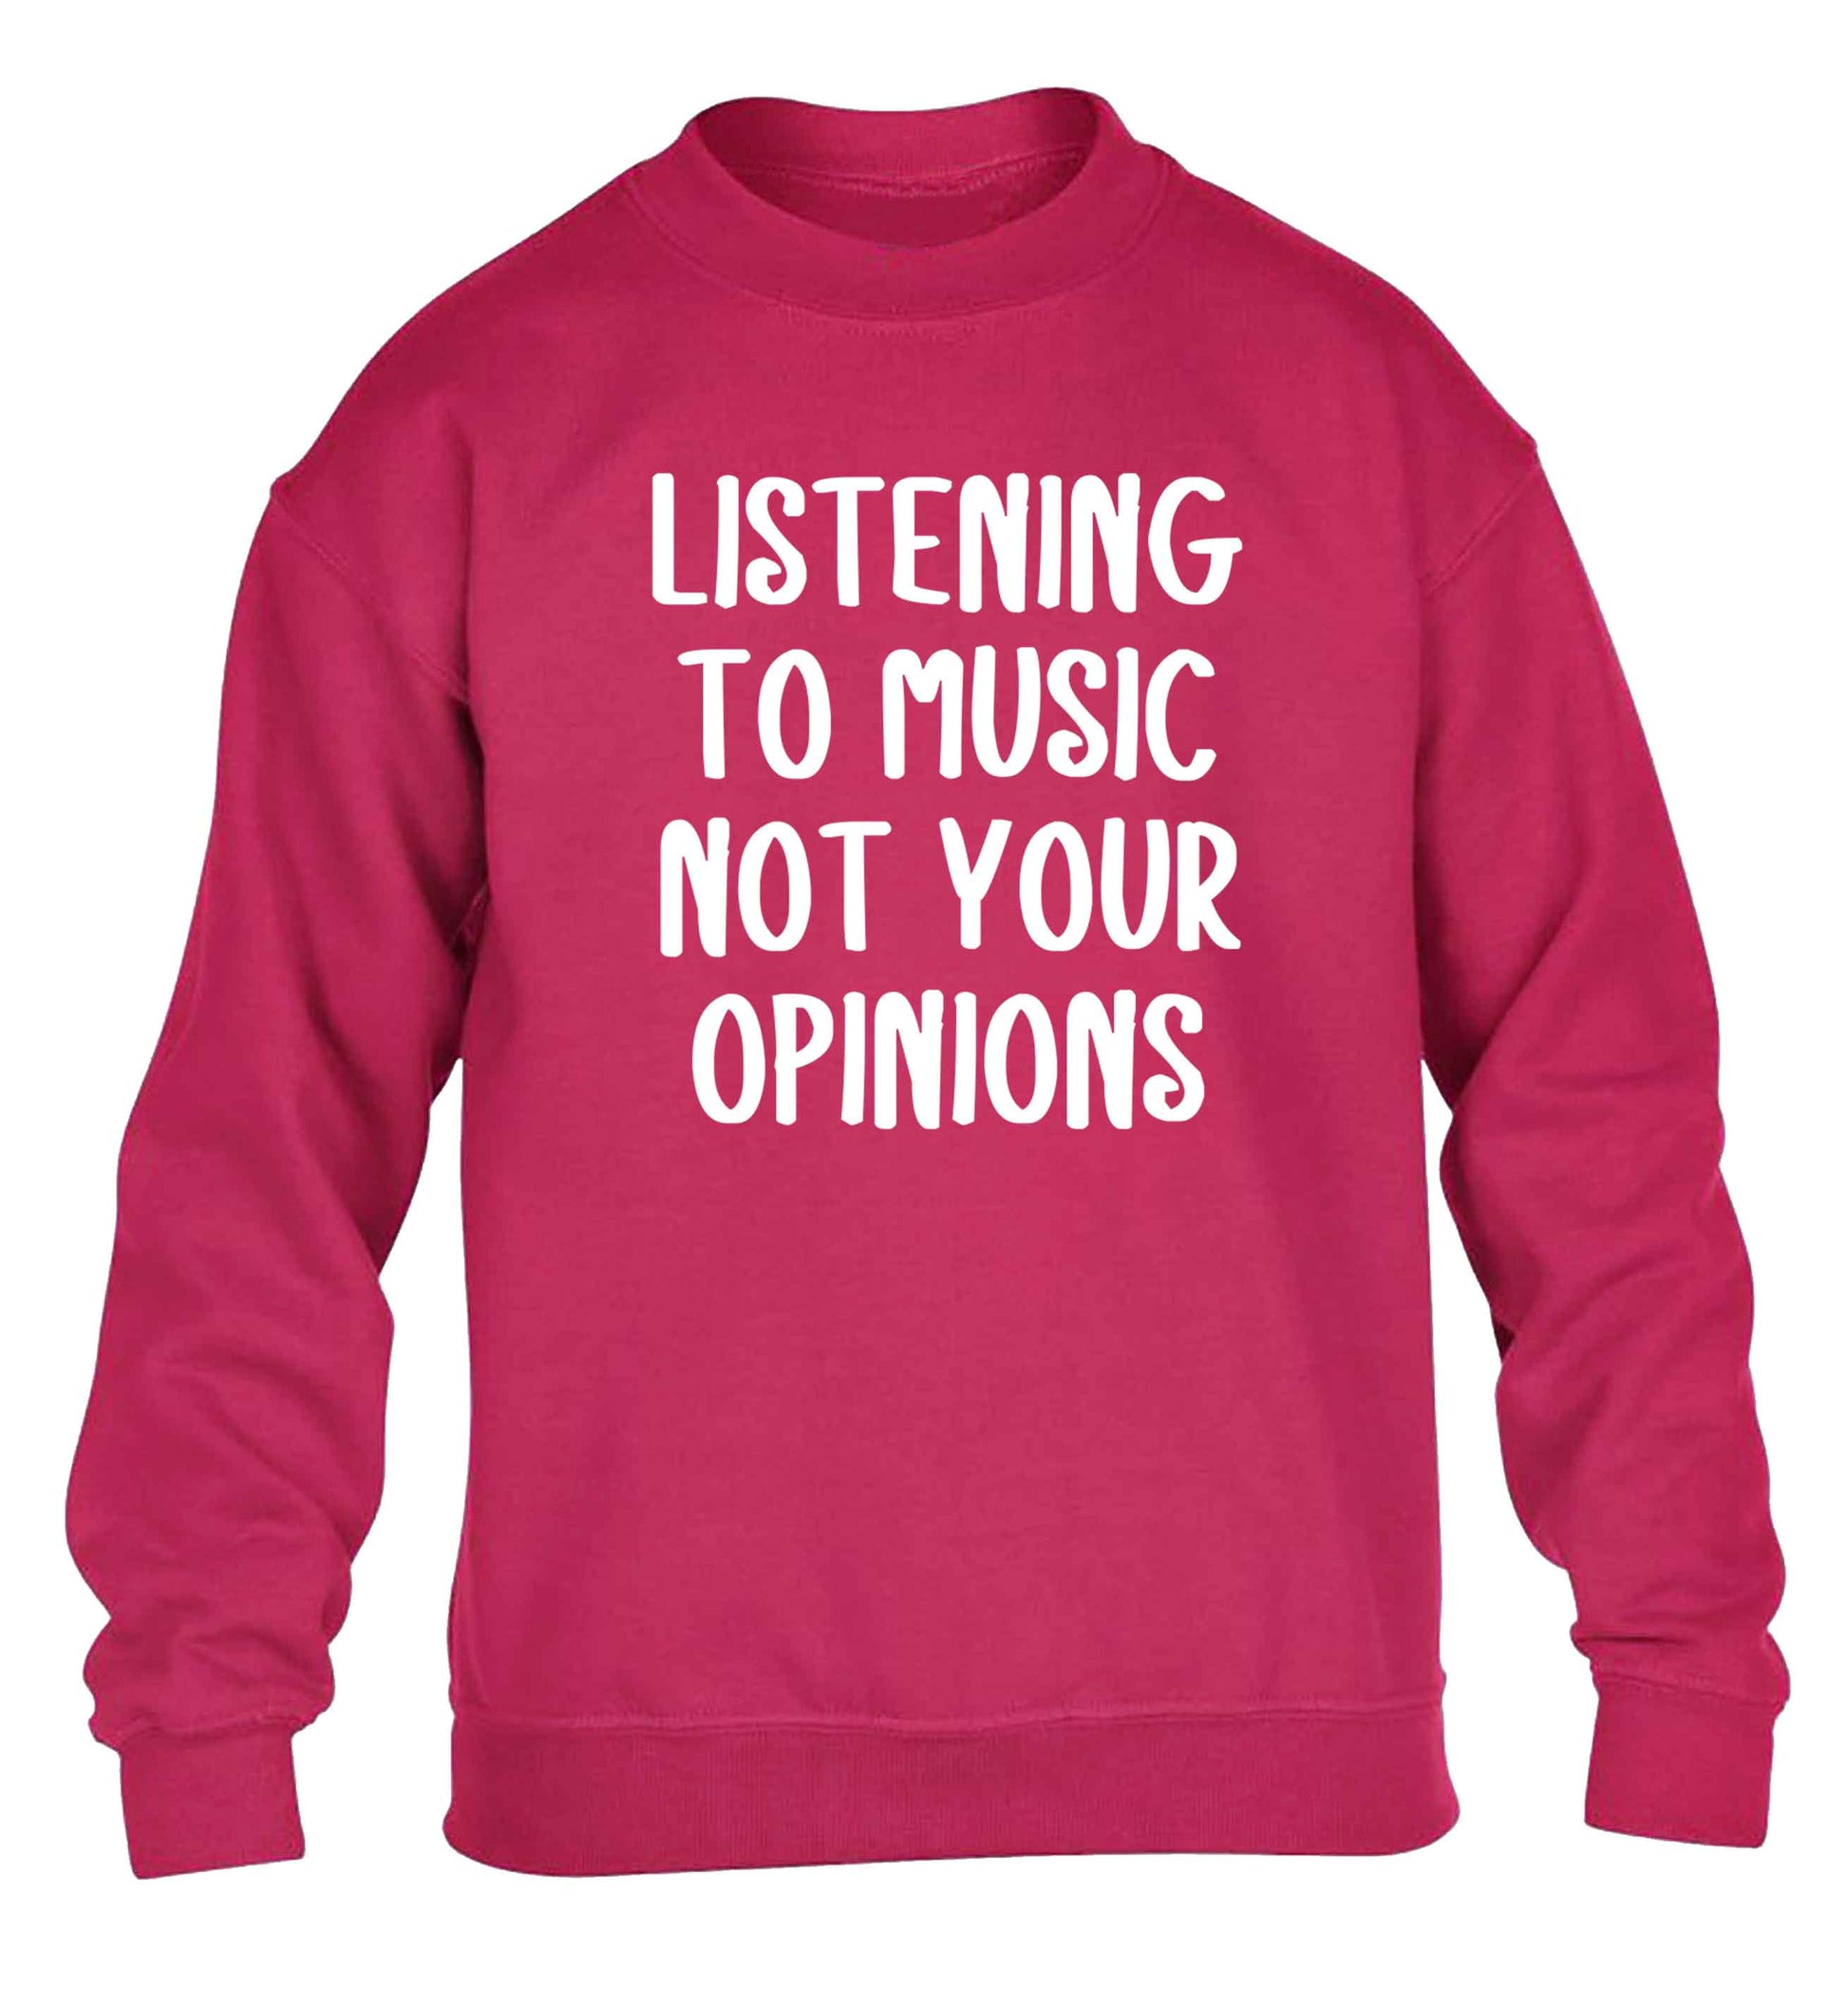 Listening to music not your opinions children's pink sweater 12-13 Years